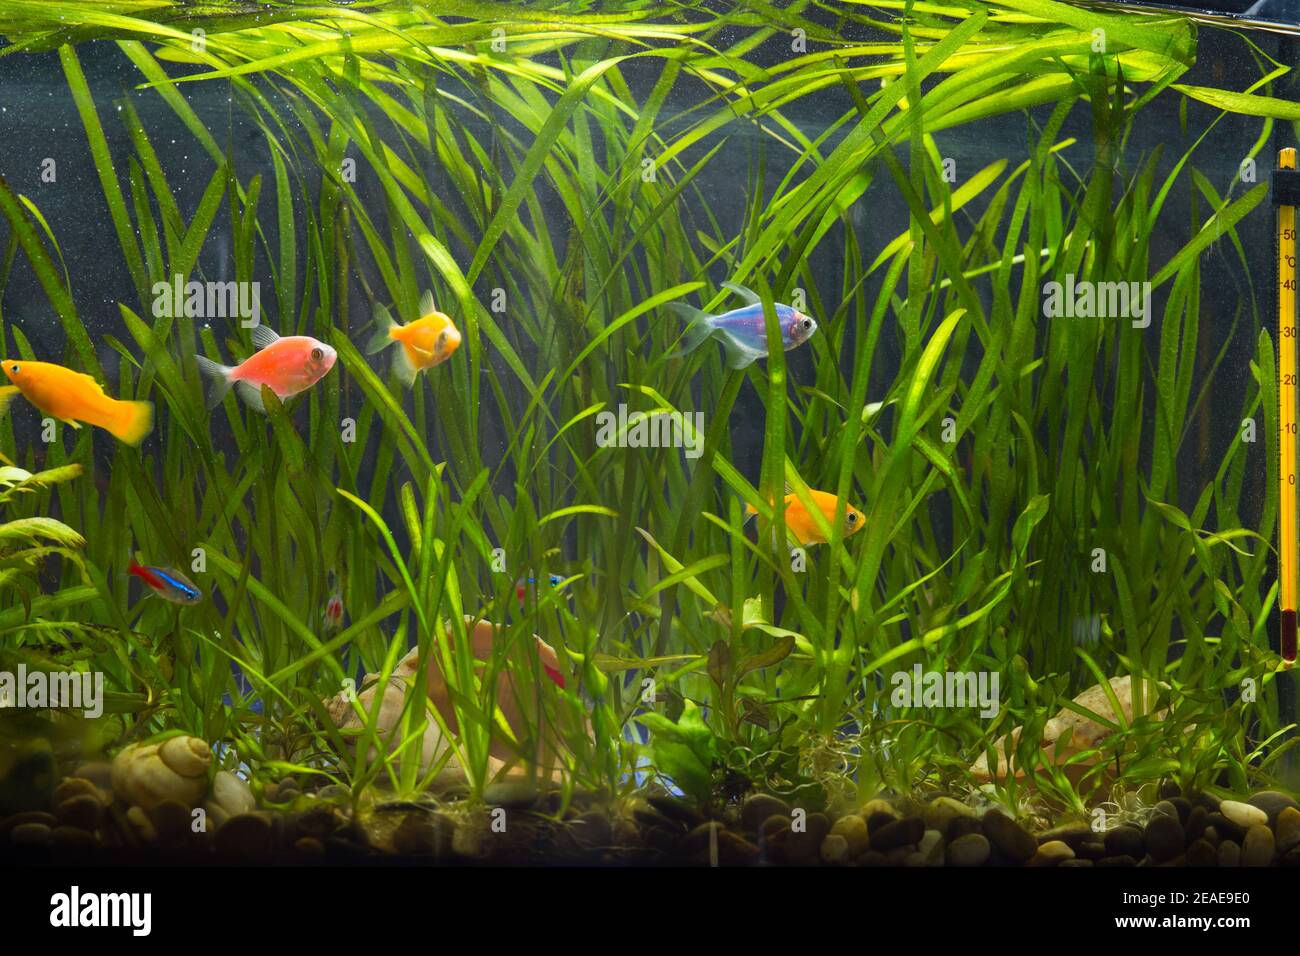 Different colored aquarium fishes in fish tank with plants Stock Photo